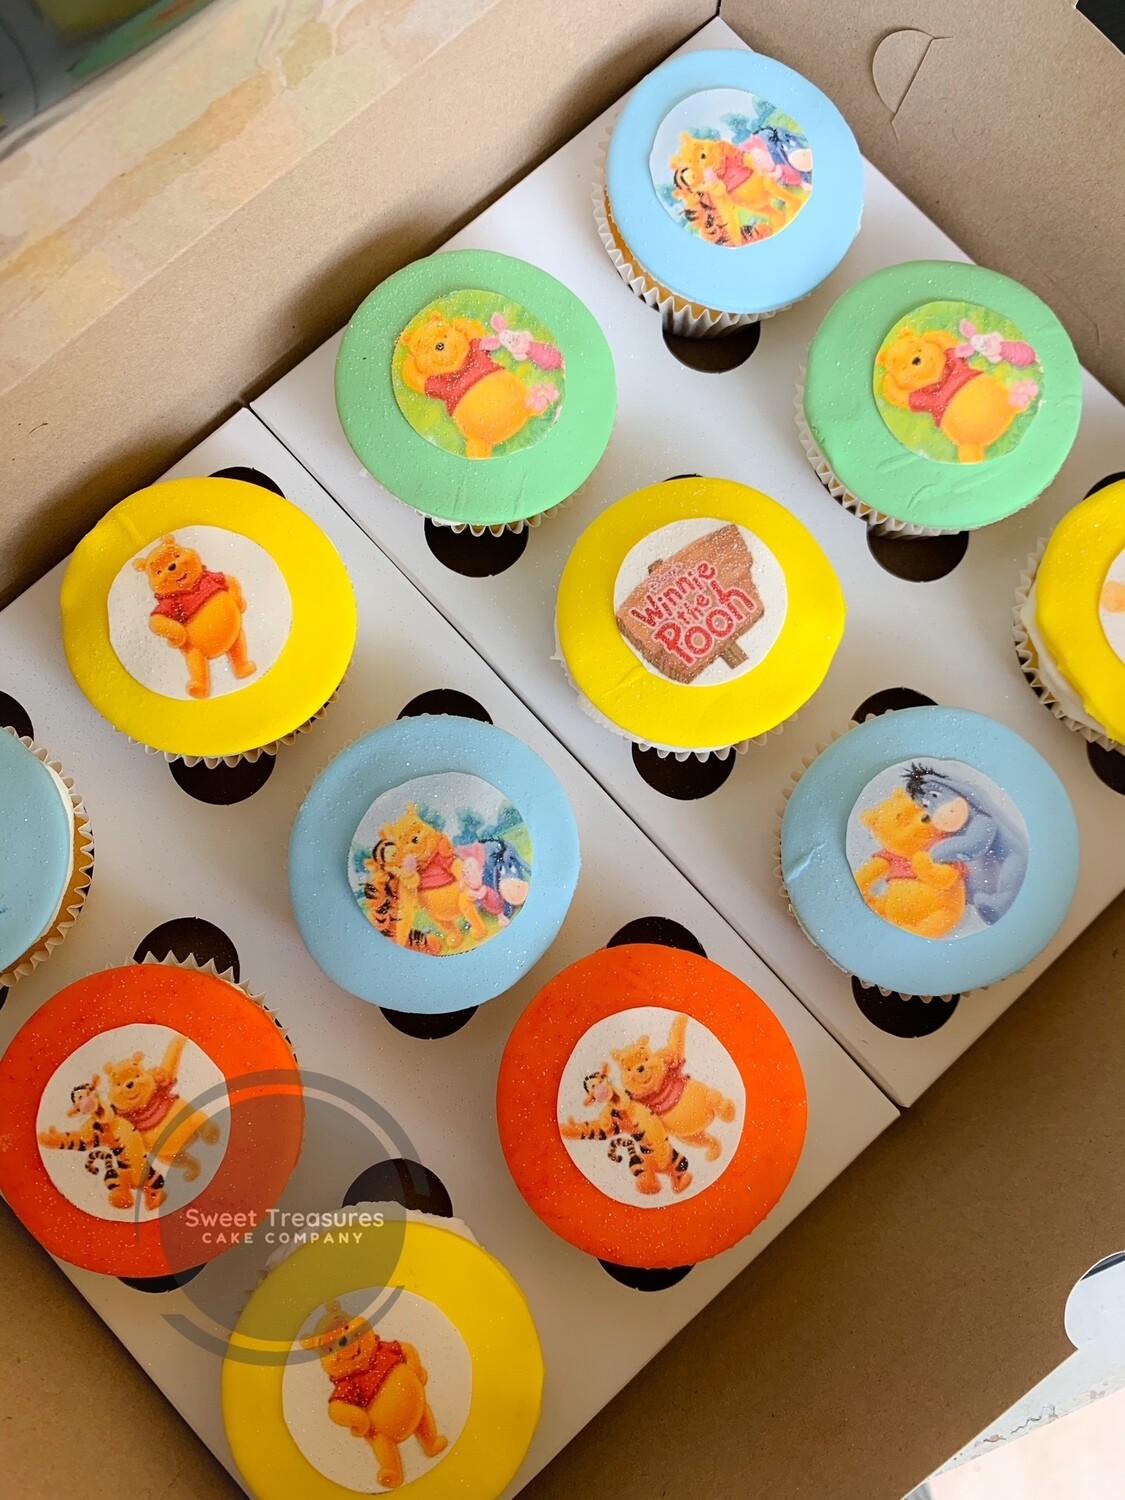 Winnie the Pooh themed cupcakes